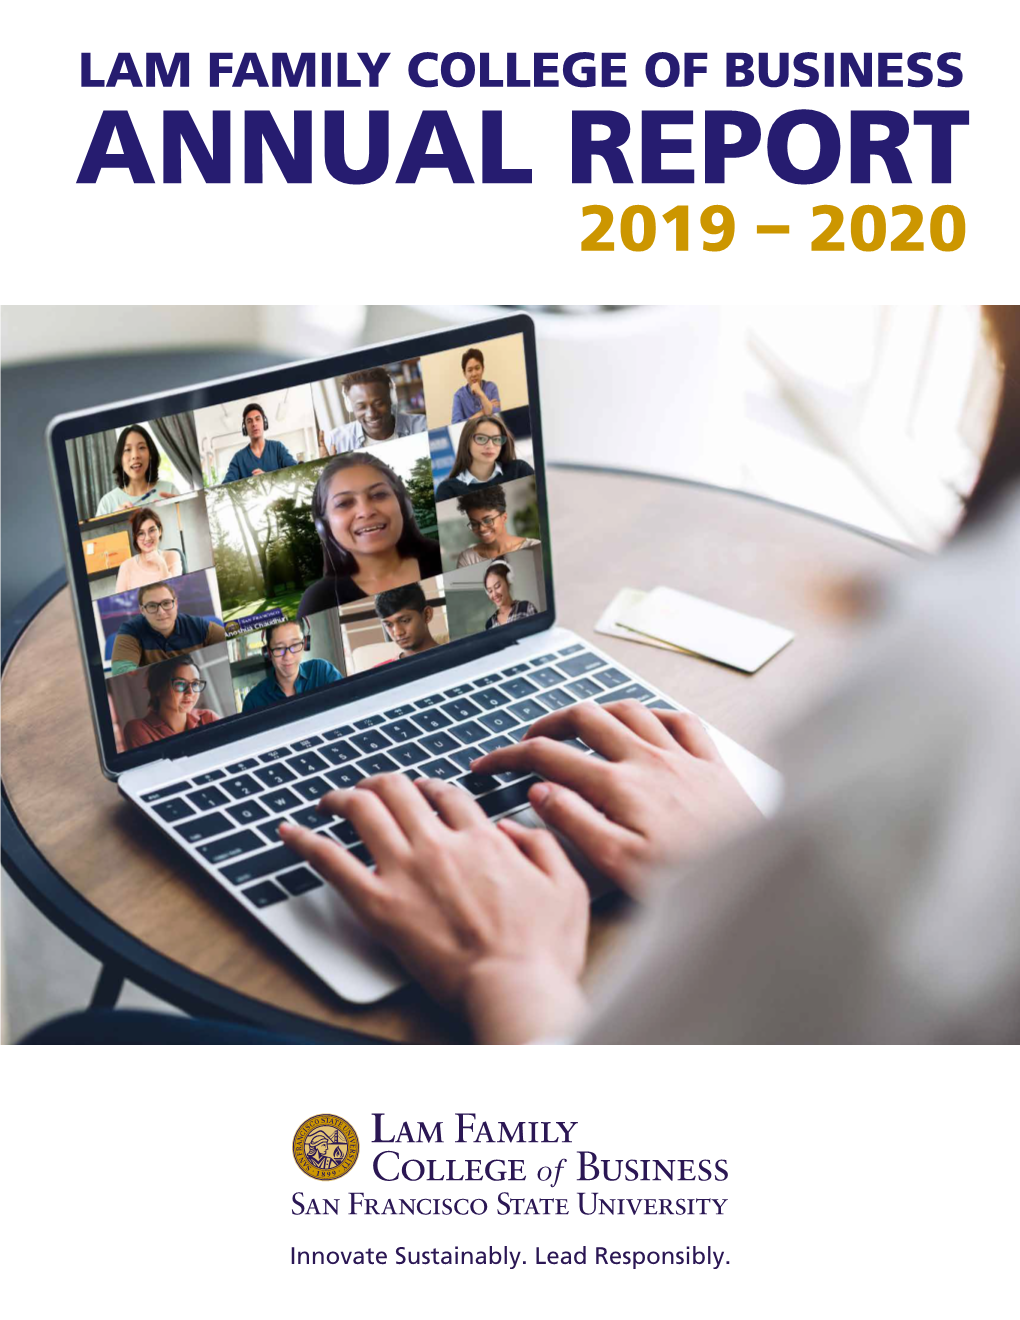 Lam Family College of Business Annual Report 2019-2020 (Pdf)